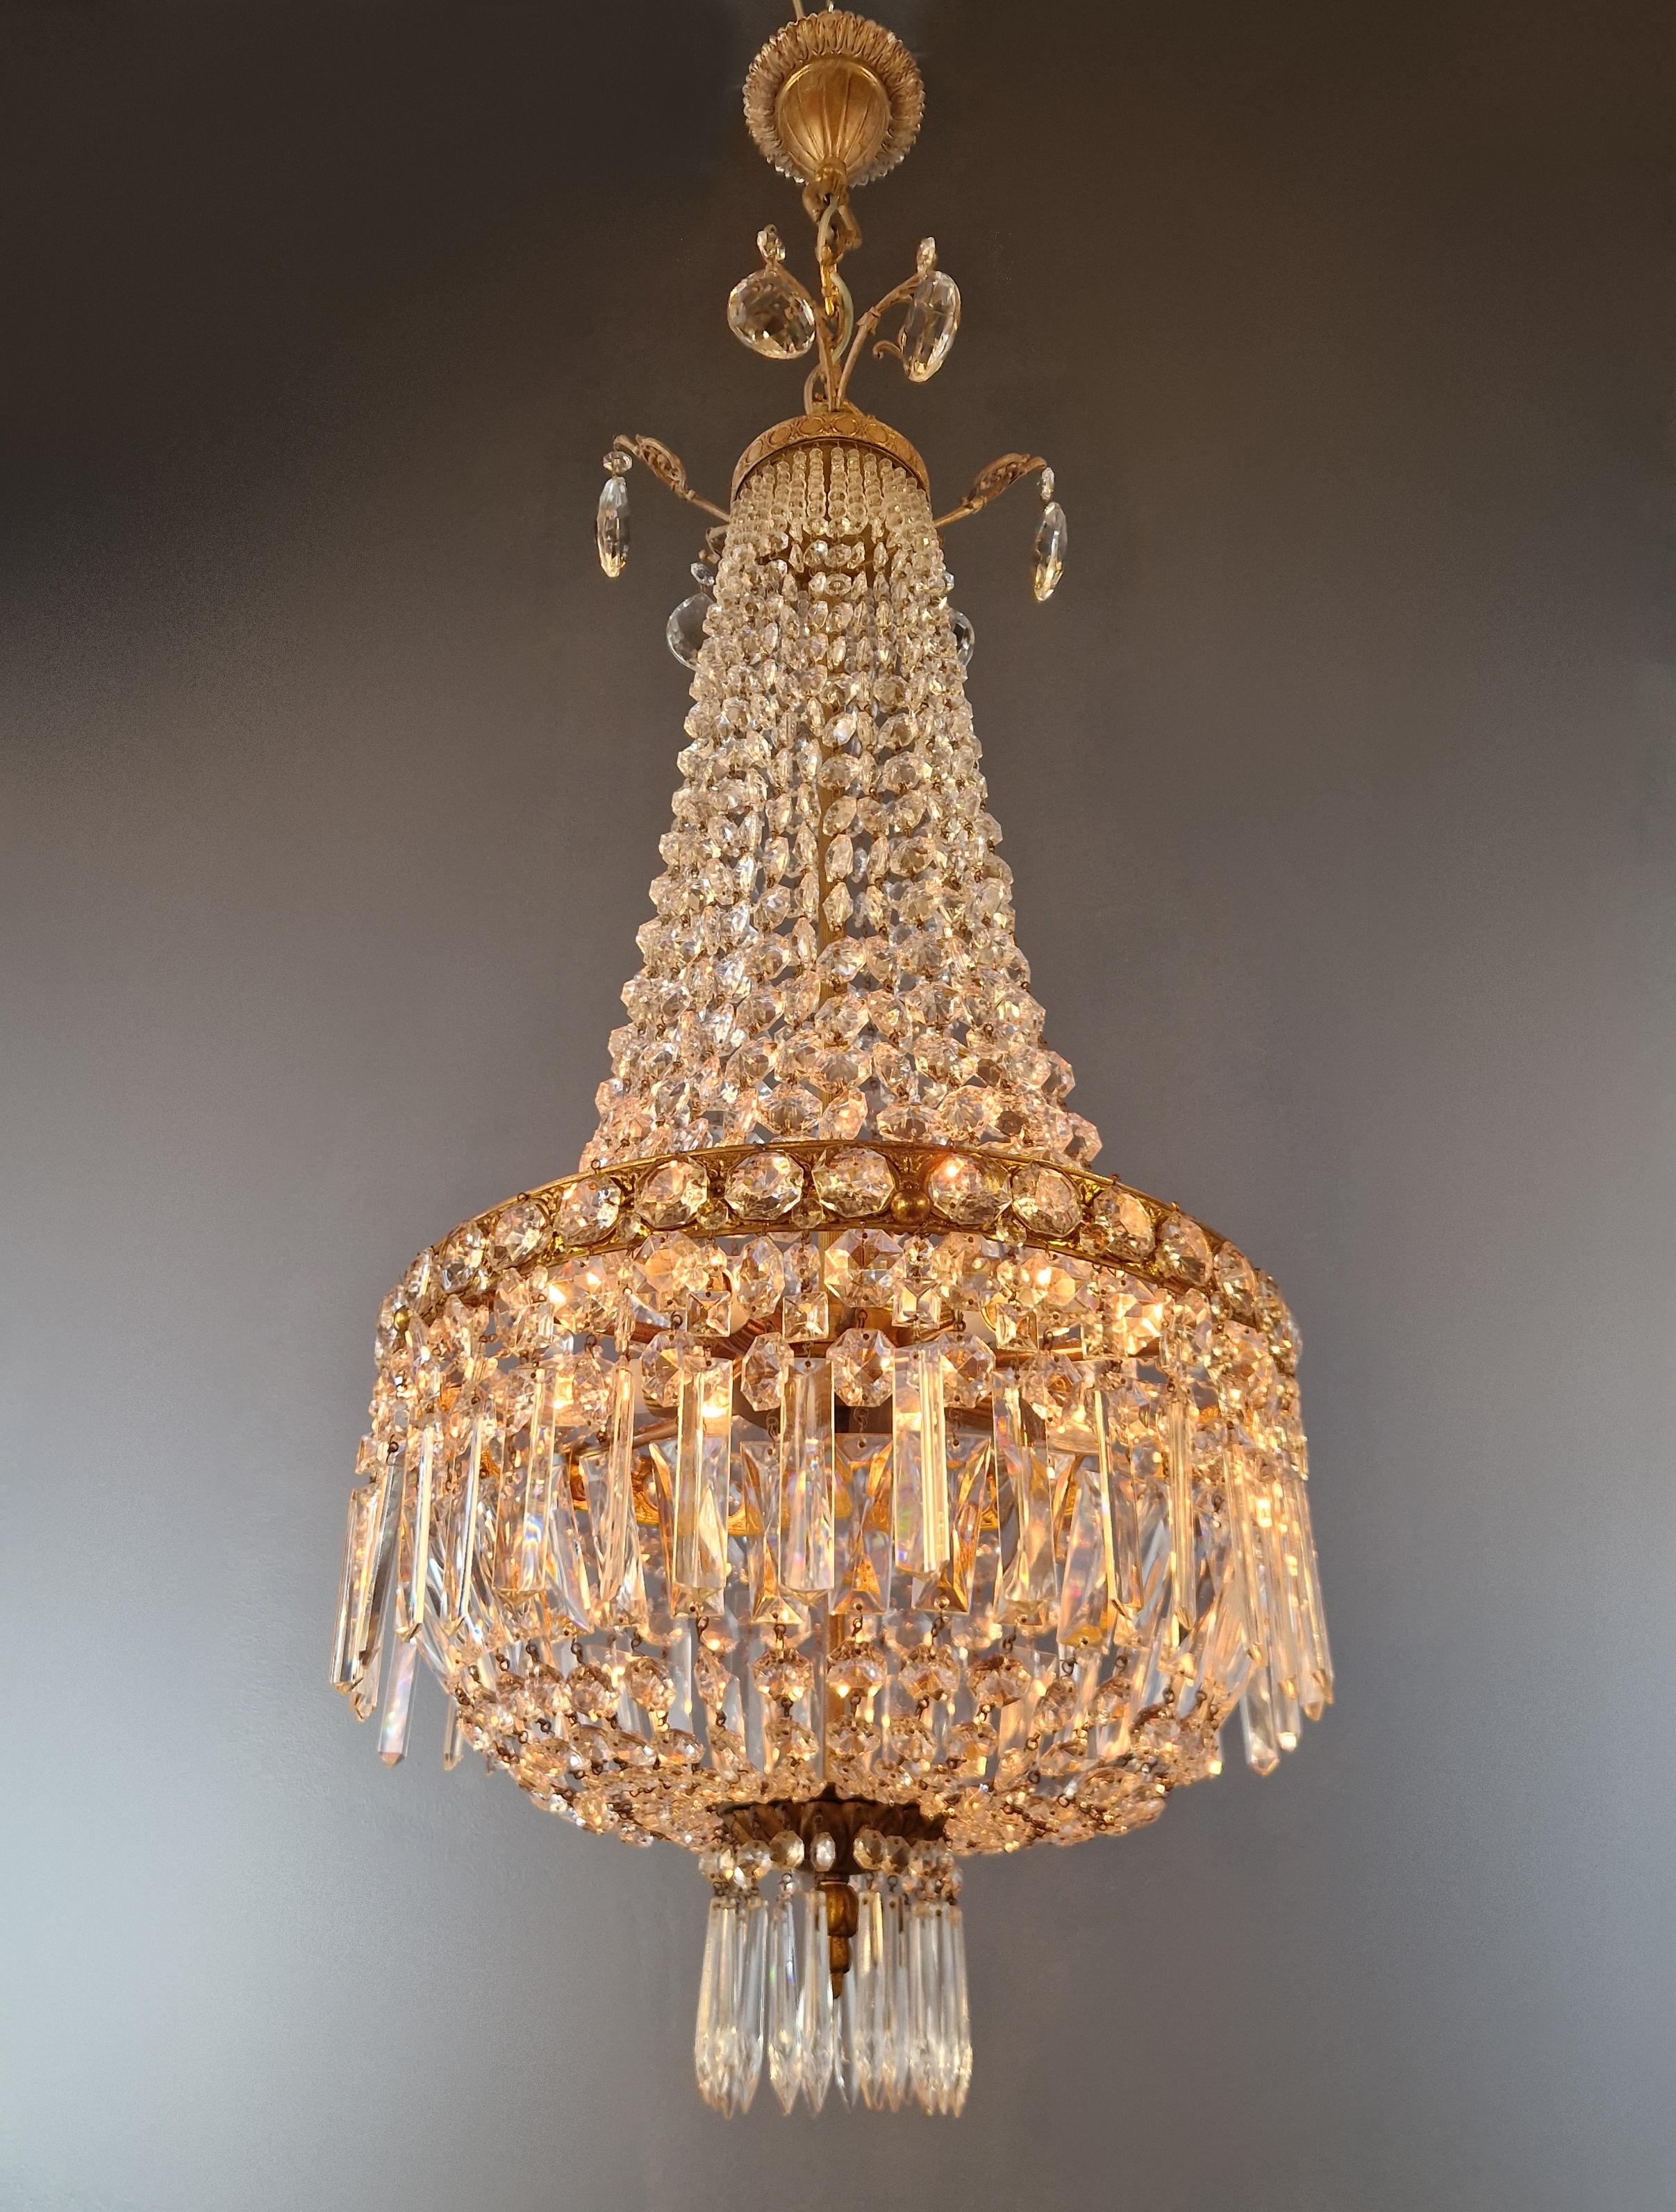 Fine Brass Empire Sac a Pearl Chandelier Crystal Lustre Basket Lamp Antique In Good Condition For Sale In Berlin, DE